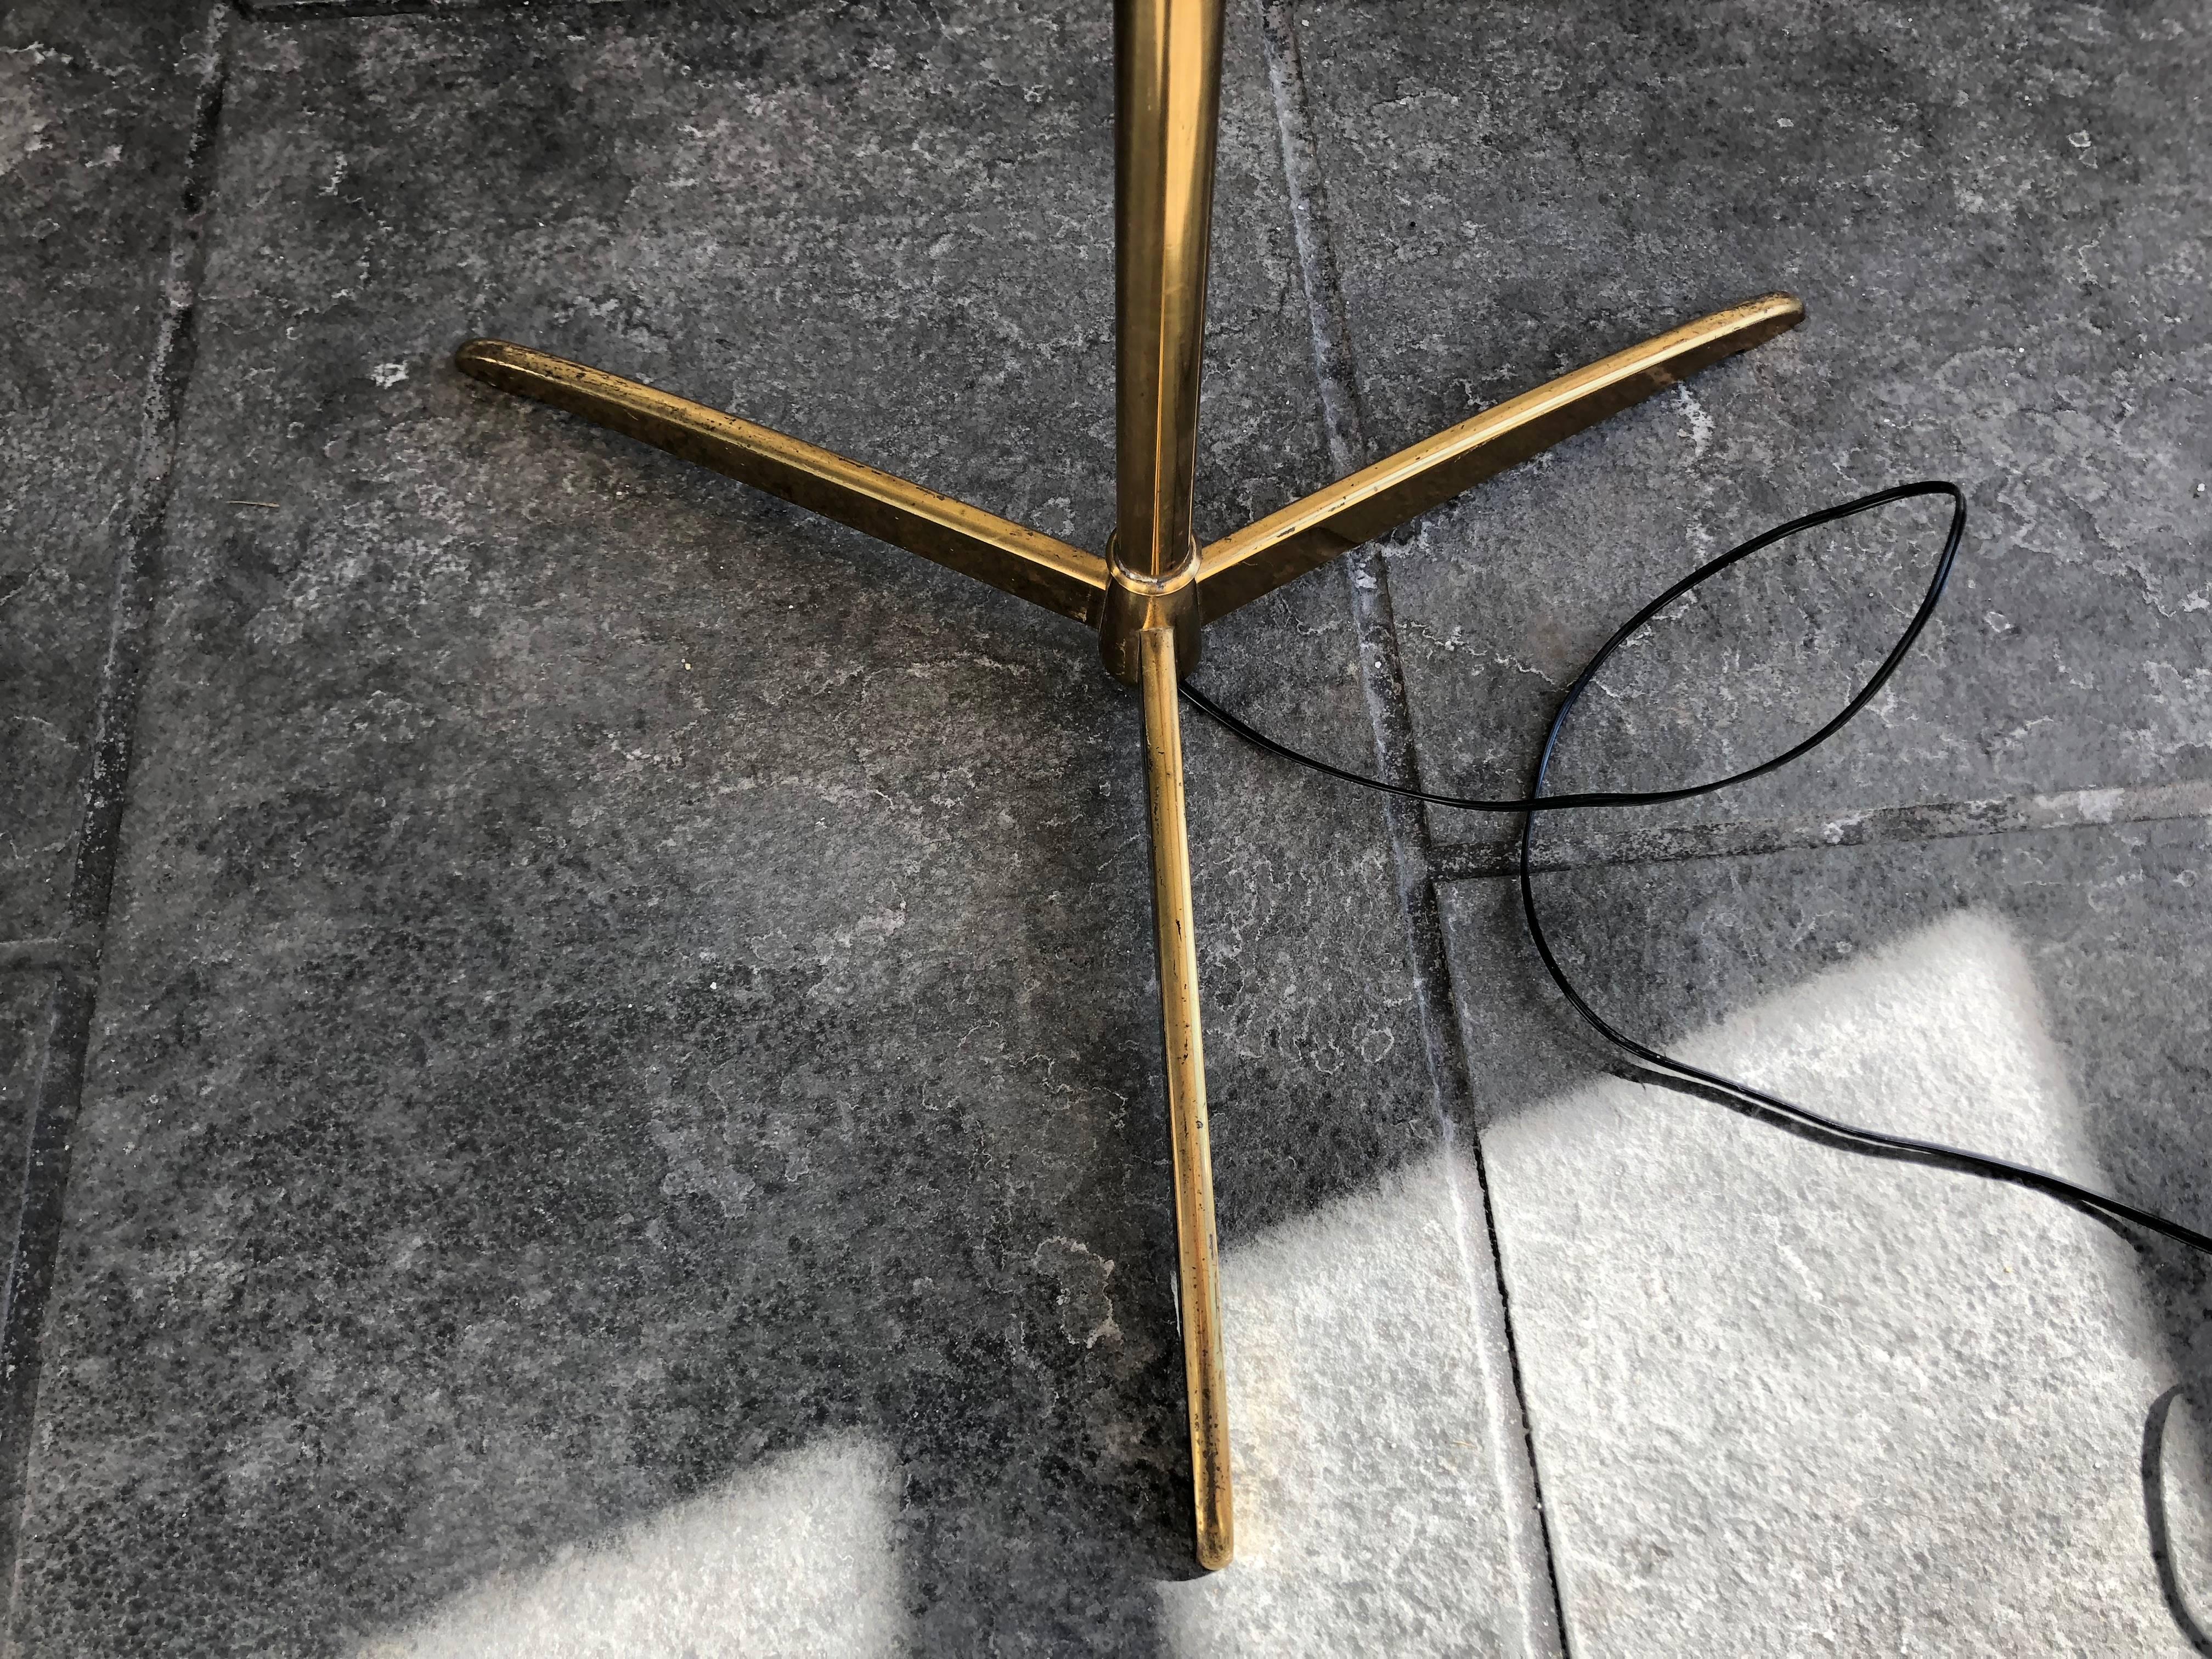 Stilnovo brass floor lamp torchere from the 1950s, all original parts, with enameled over-scaled up shade, mounted on three brass feet. This lamp has a single pole with leather turn adjustment in center allowing a height of between 54